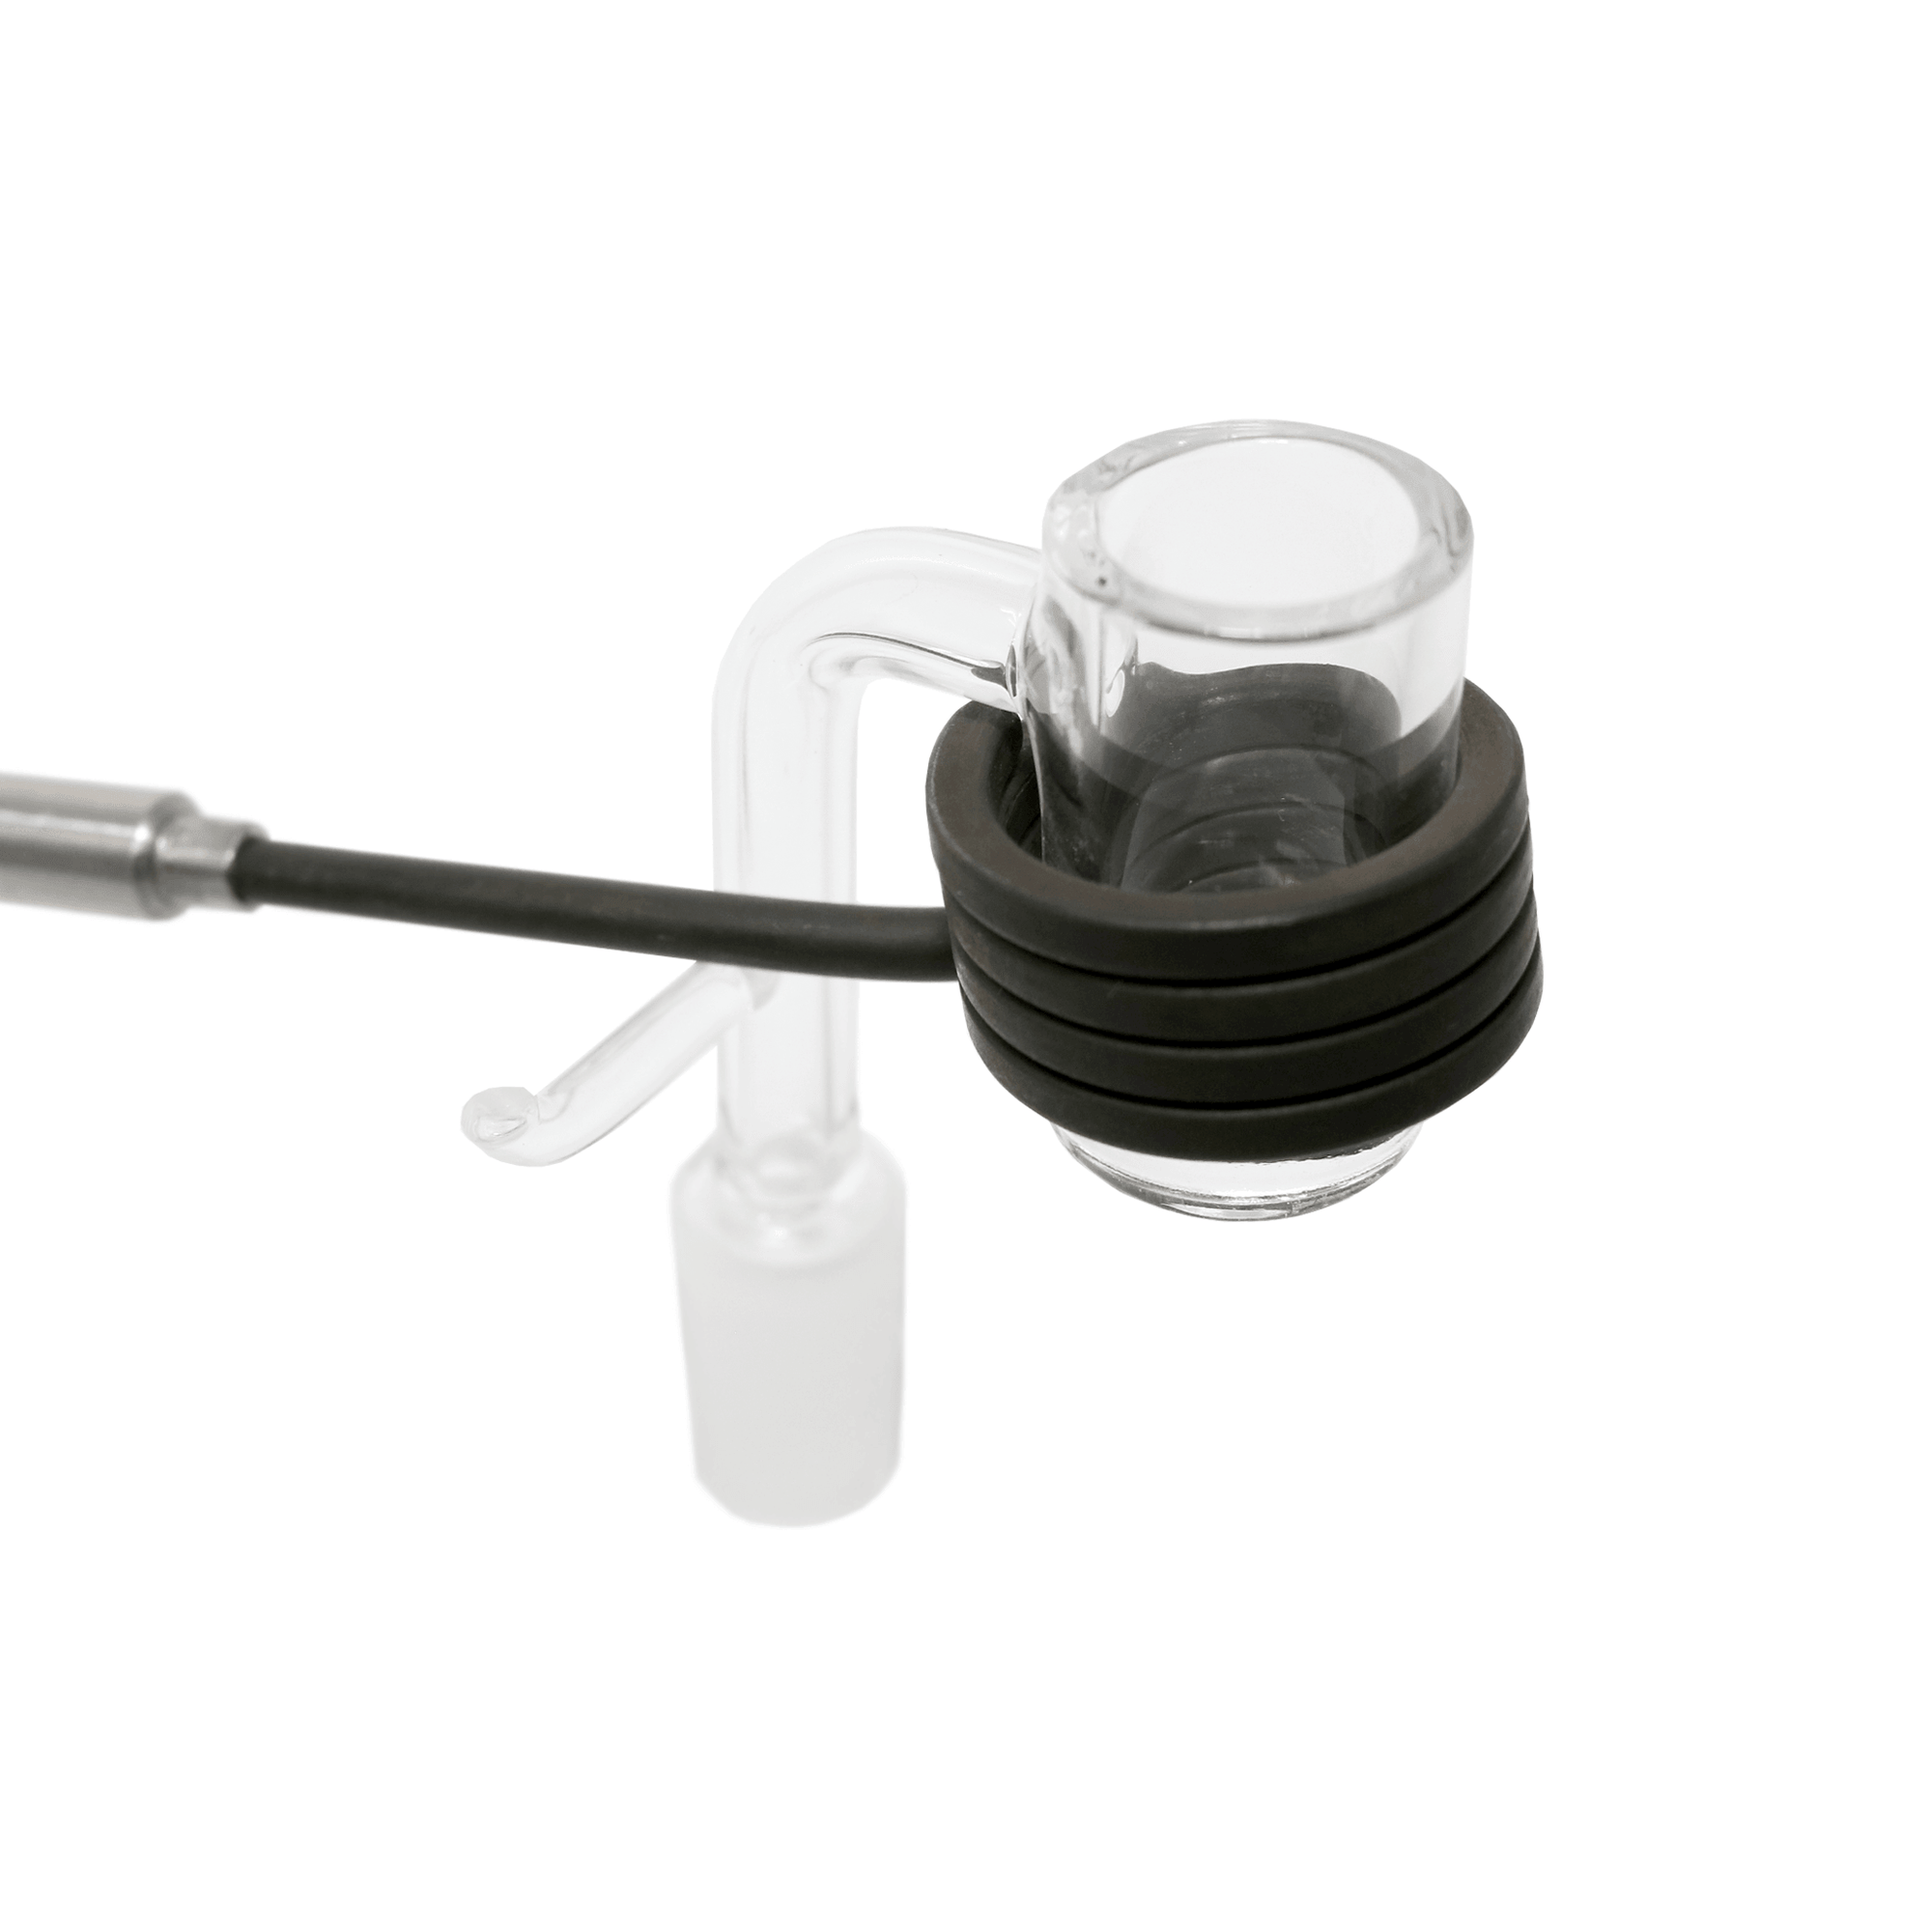 Quartz Enail E-Banger 10mm Male for 20mm Coil (Enail) | In Use View | the dabbing specialists